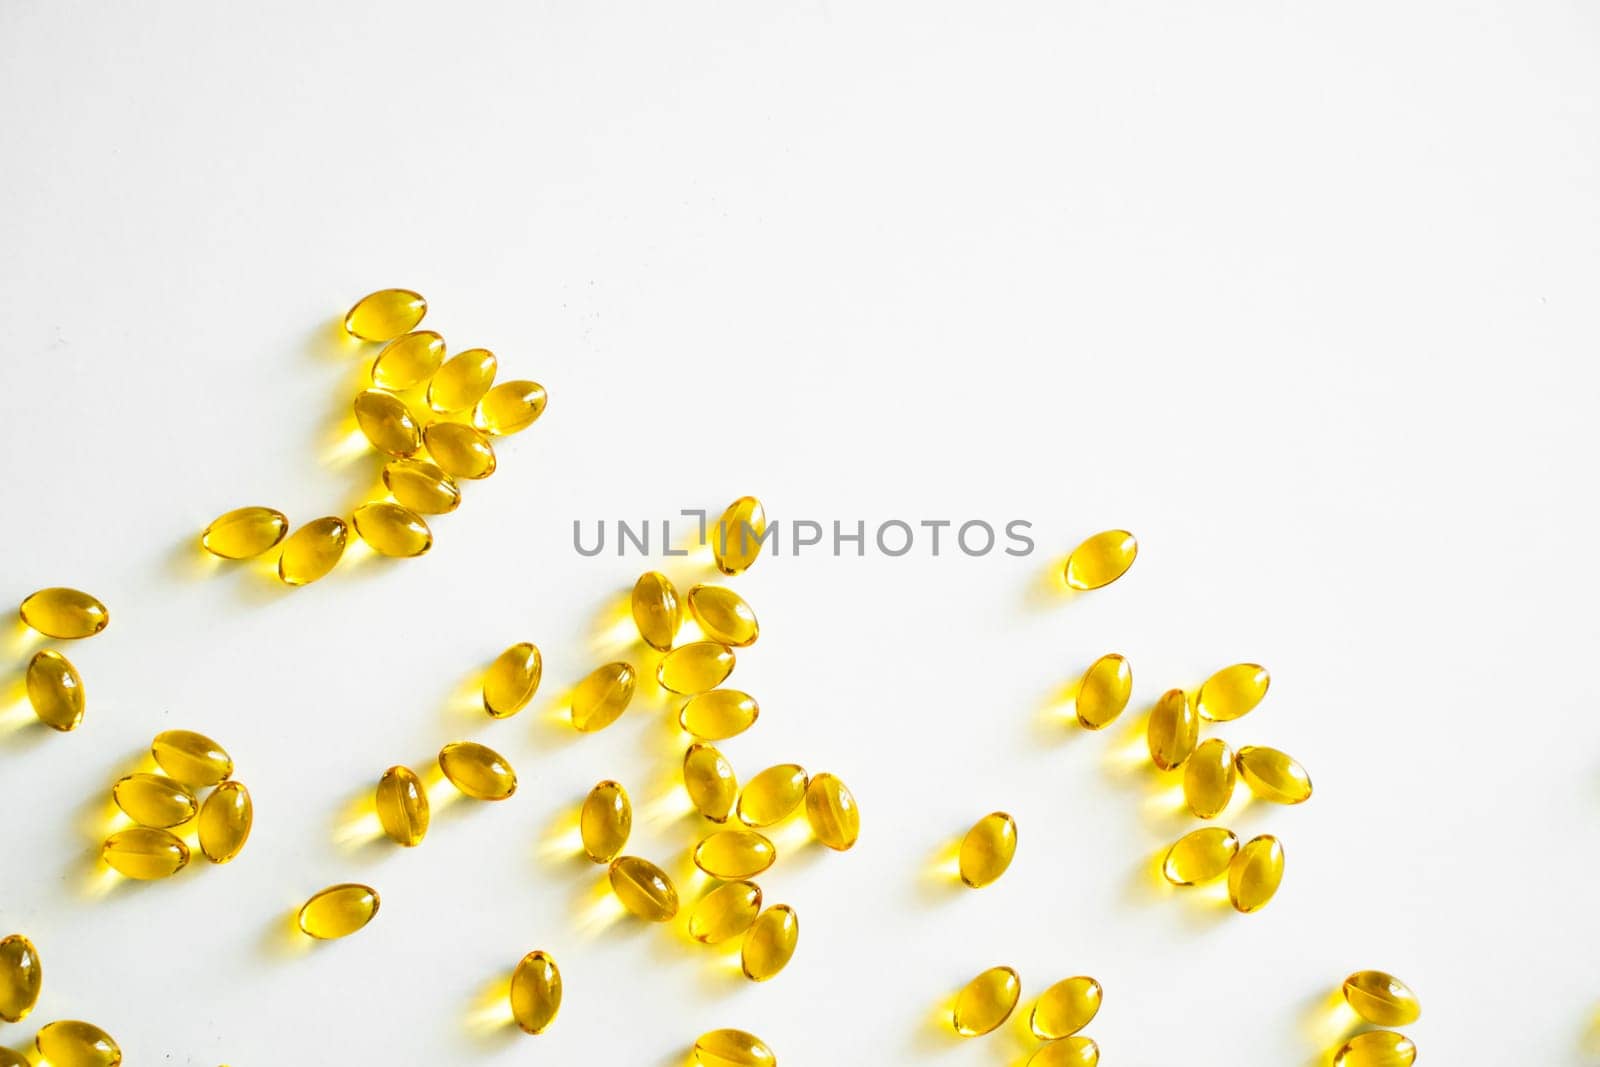 Health care and immunity support concept. Vitamin D3 softgel capsules on a white surface. Yellow softgels, top view, copy space. Nutritional supplements